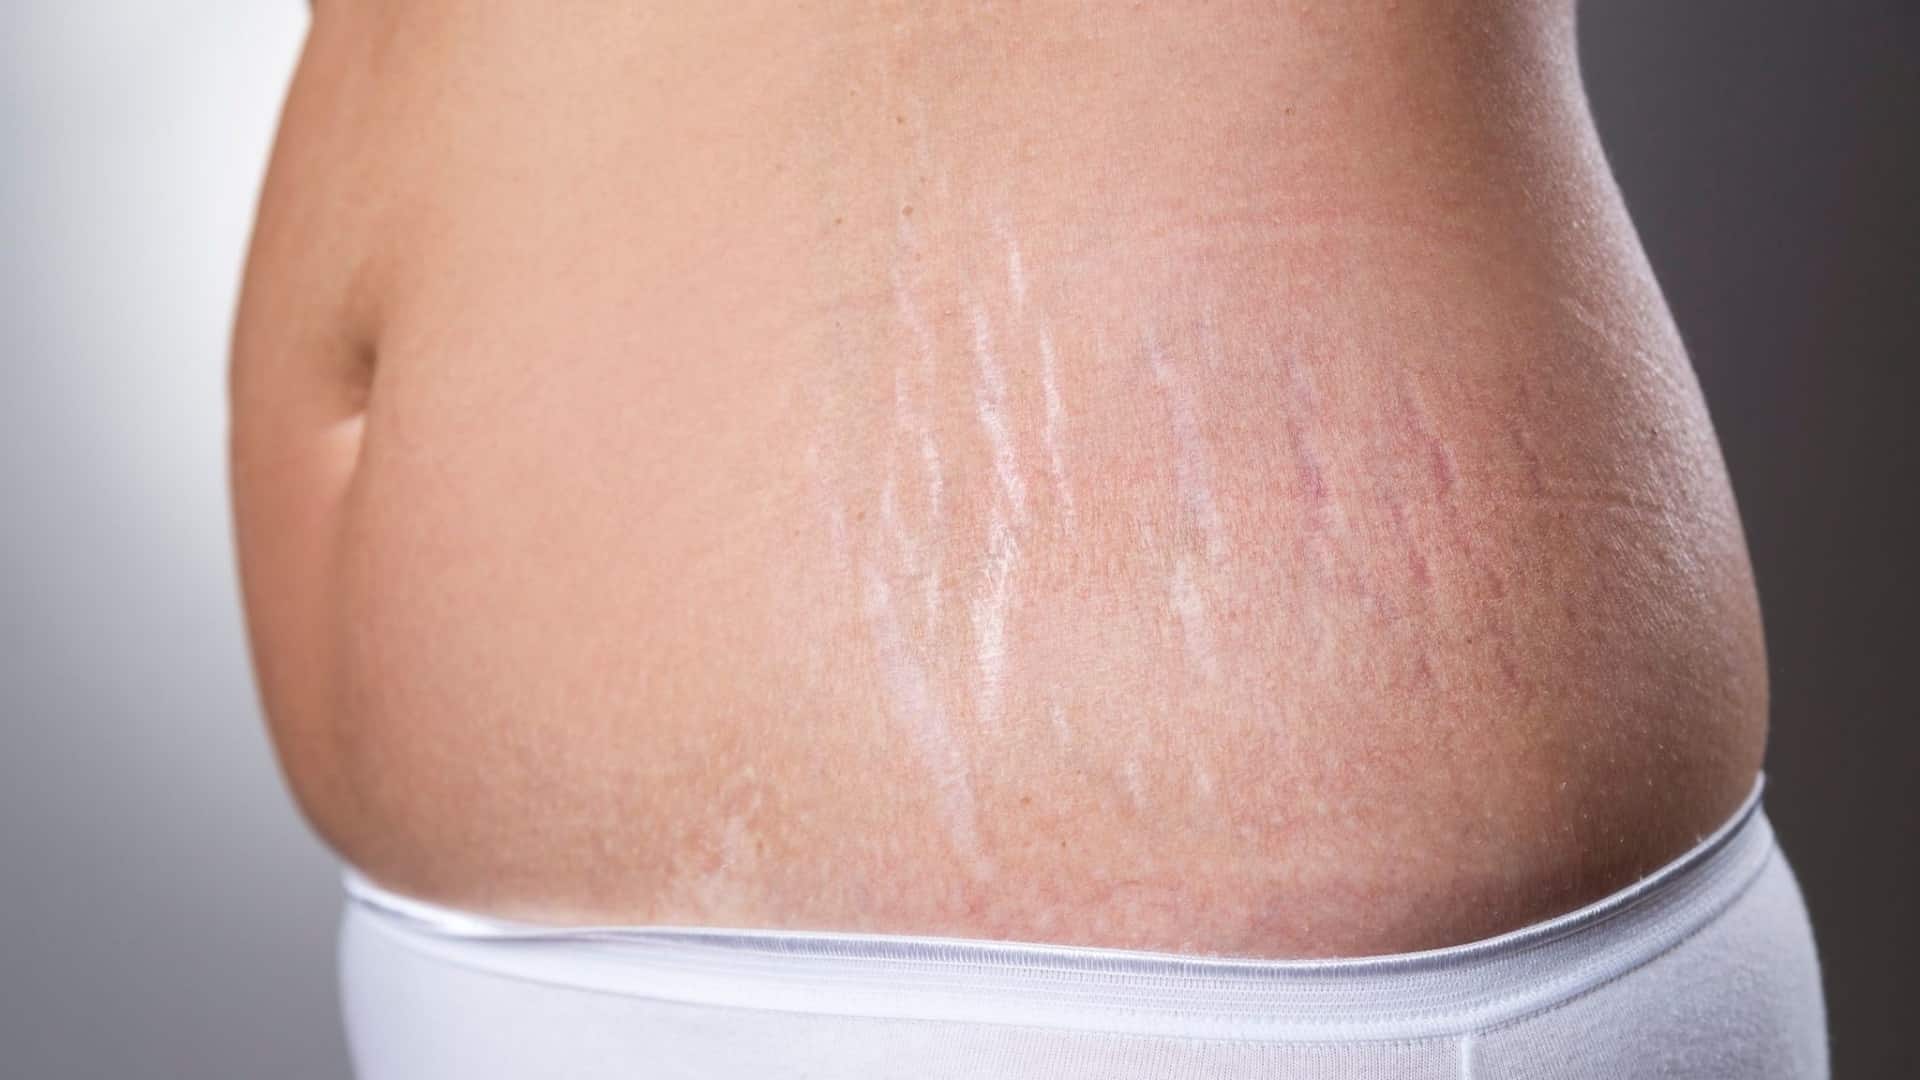 13 Celebrities With Stretch Marks From Pregnancy